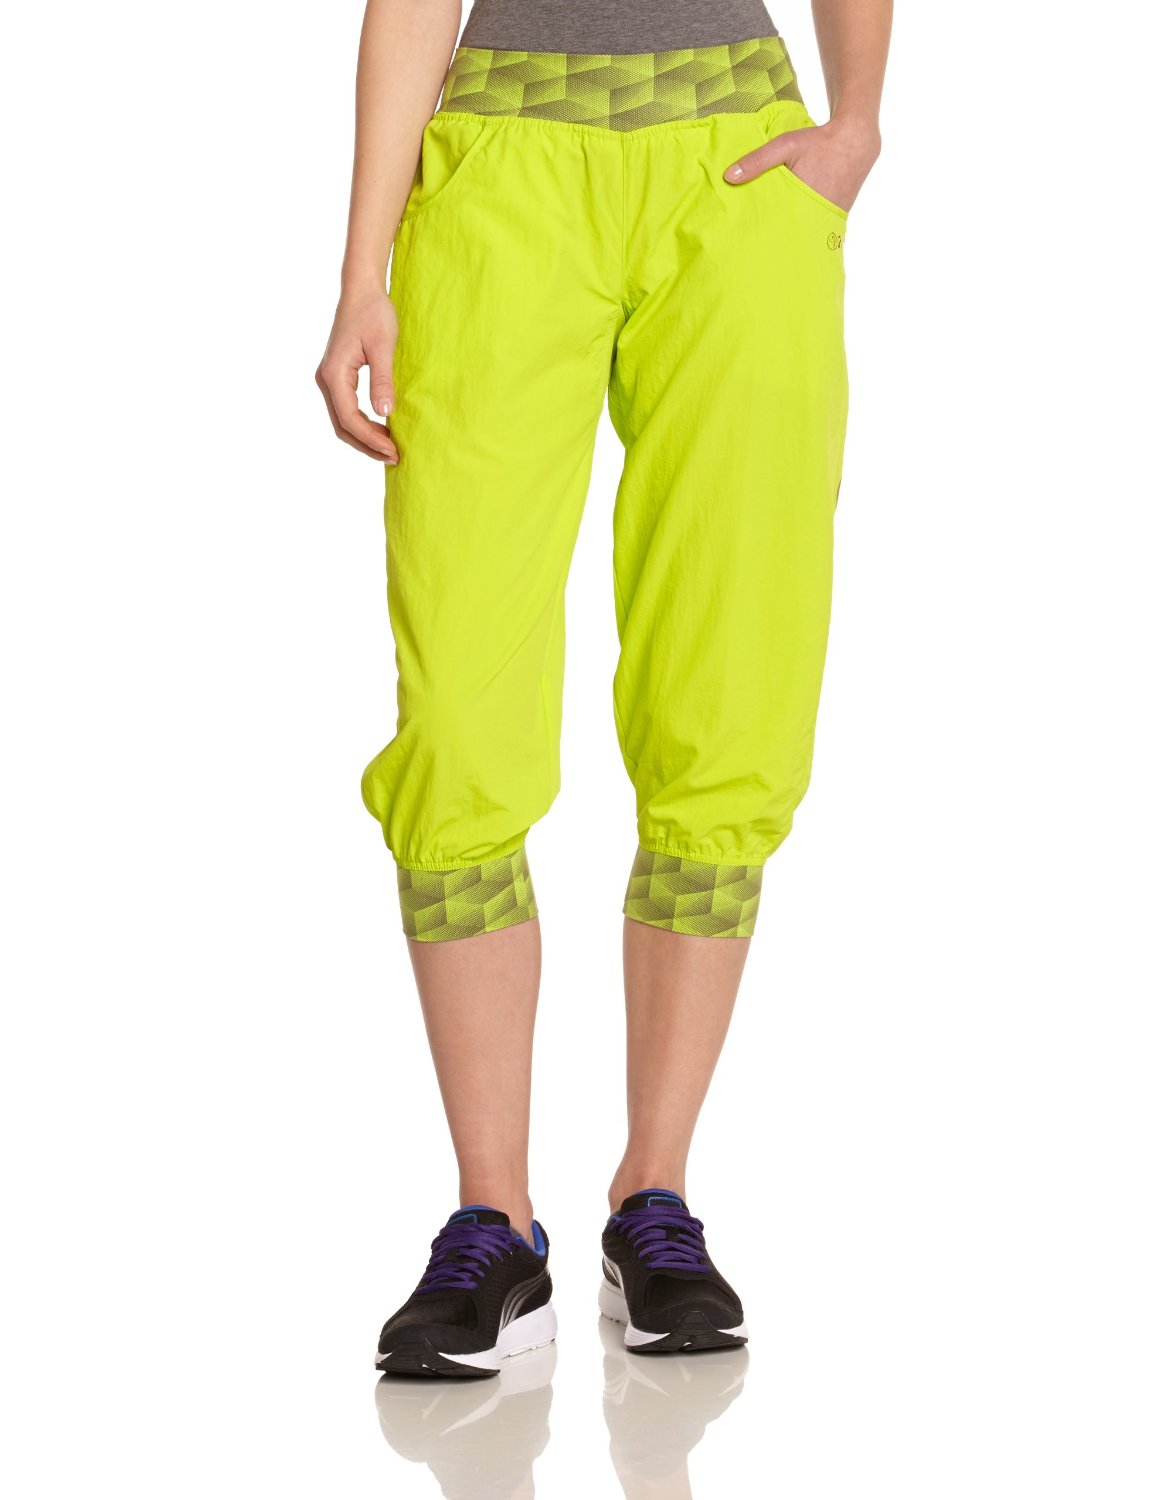 Awesome Tron Cargo Pants